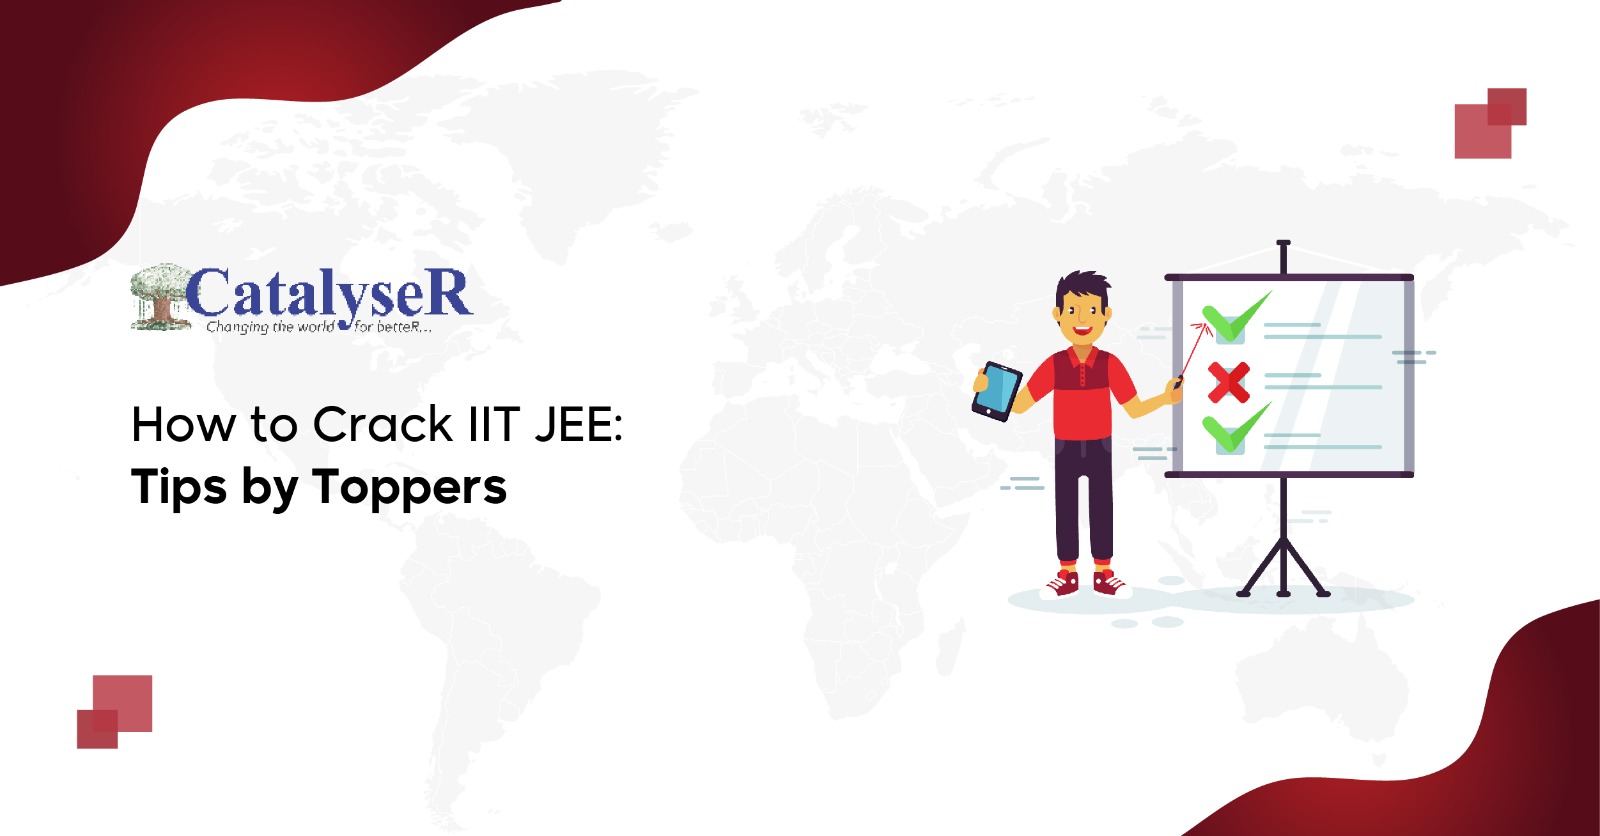 How to Crack IIT JEE: Tips by Toppers